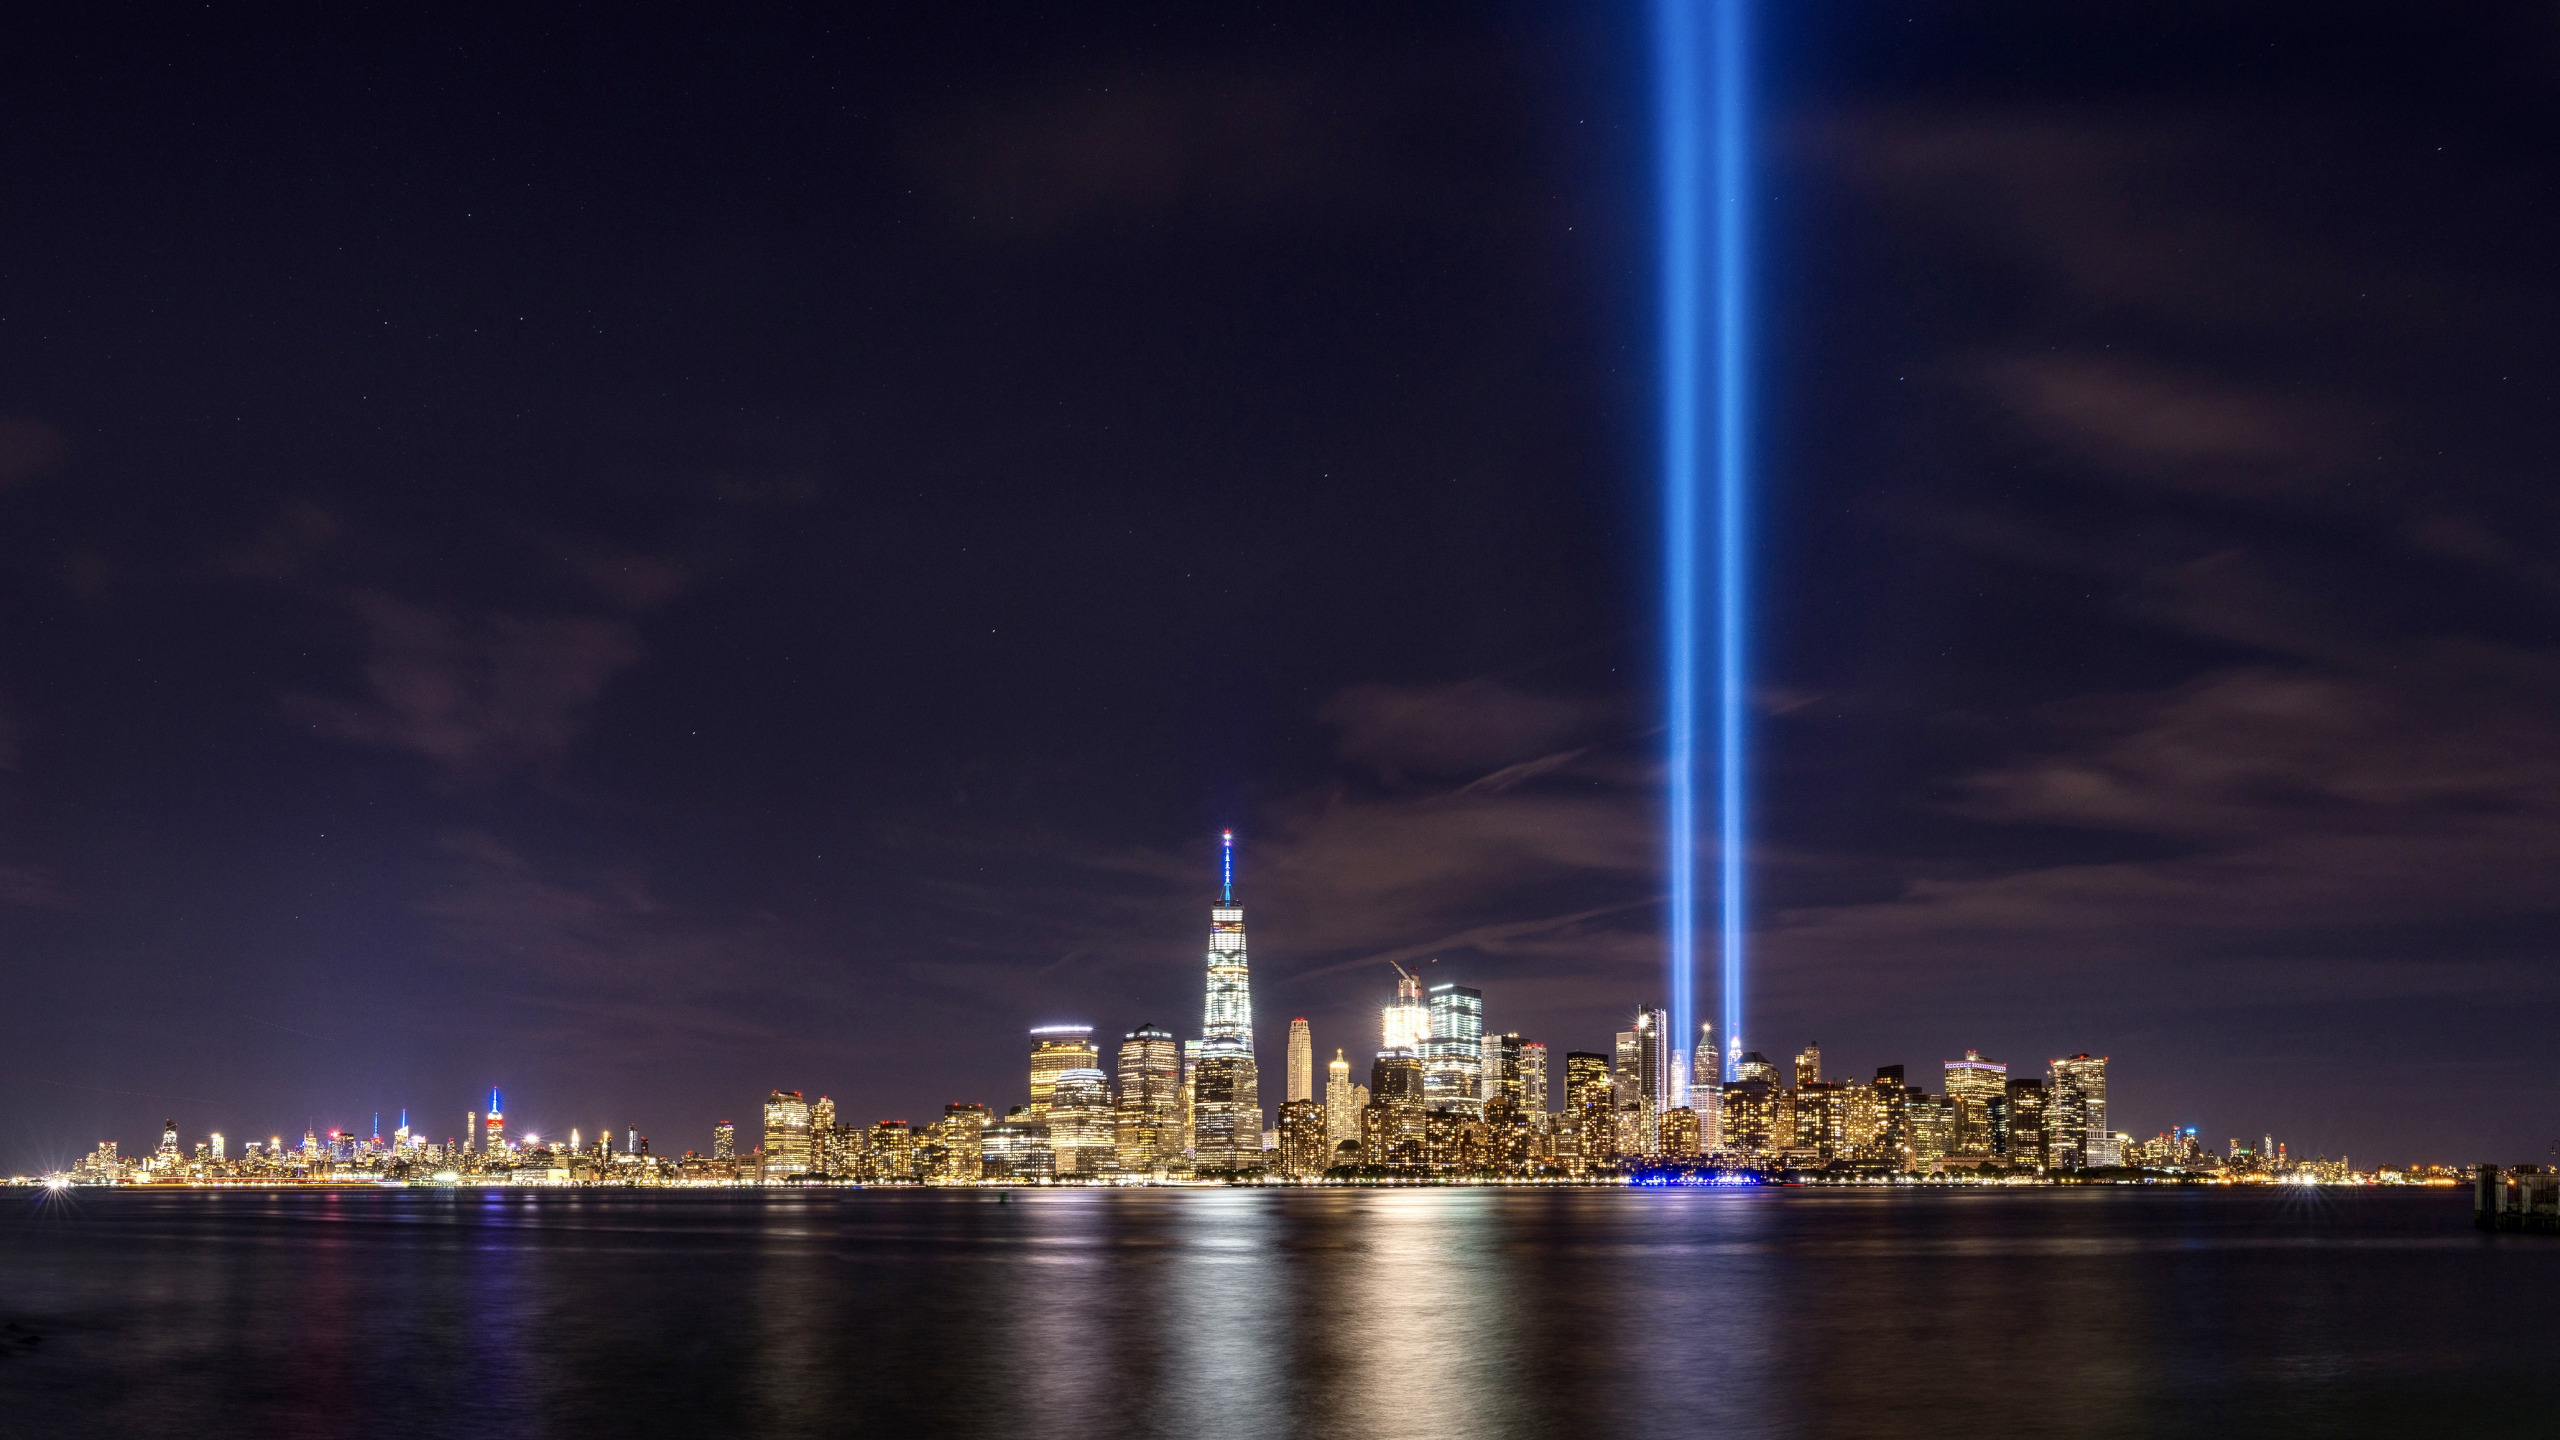 NAD President Commemorates 9/11, Calls Adventists in North America to Prayer of Remembrance